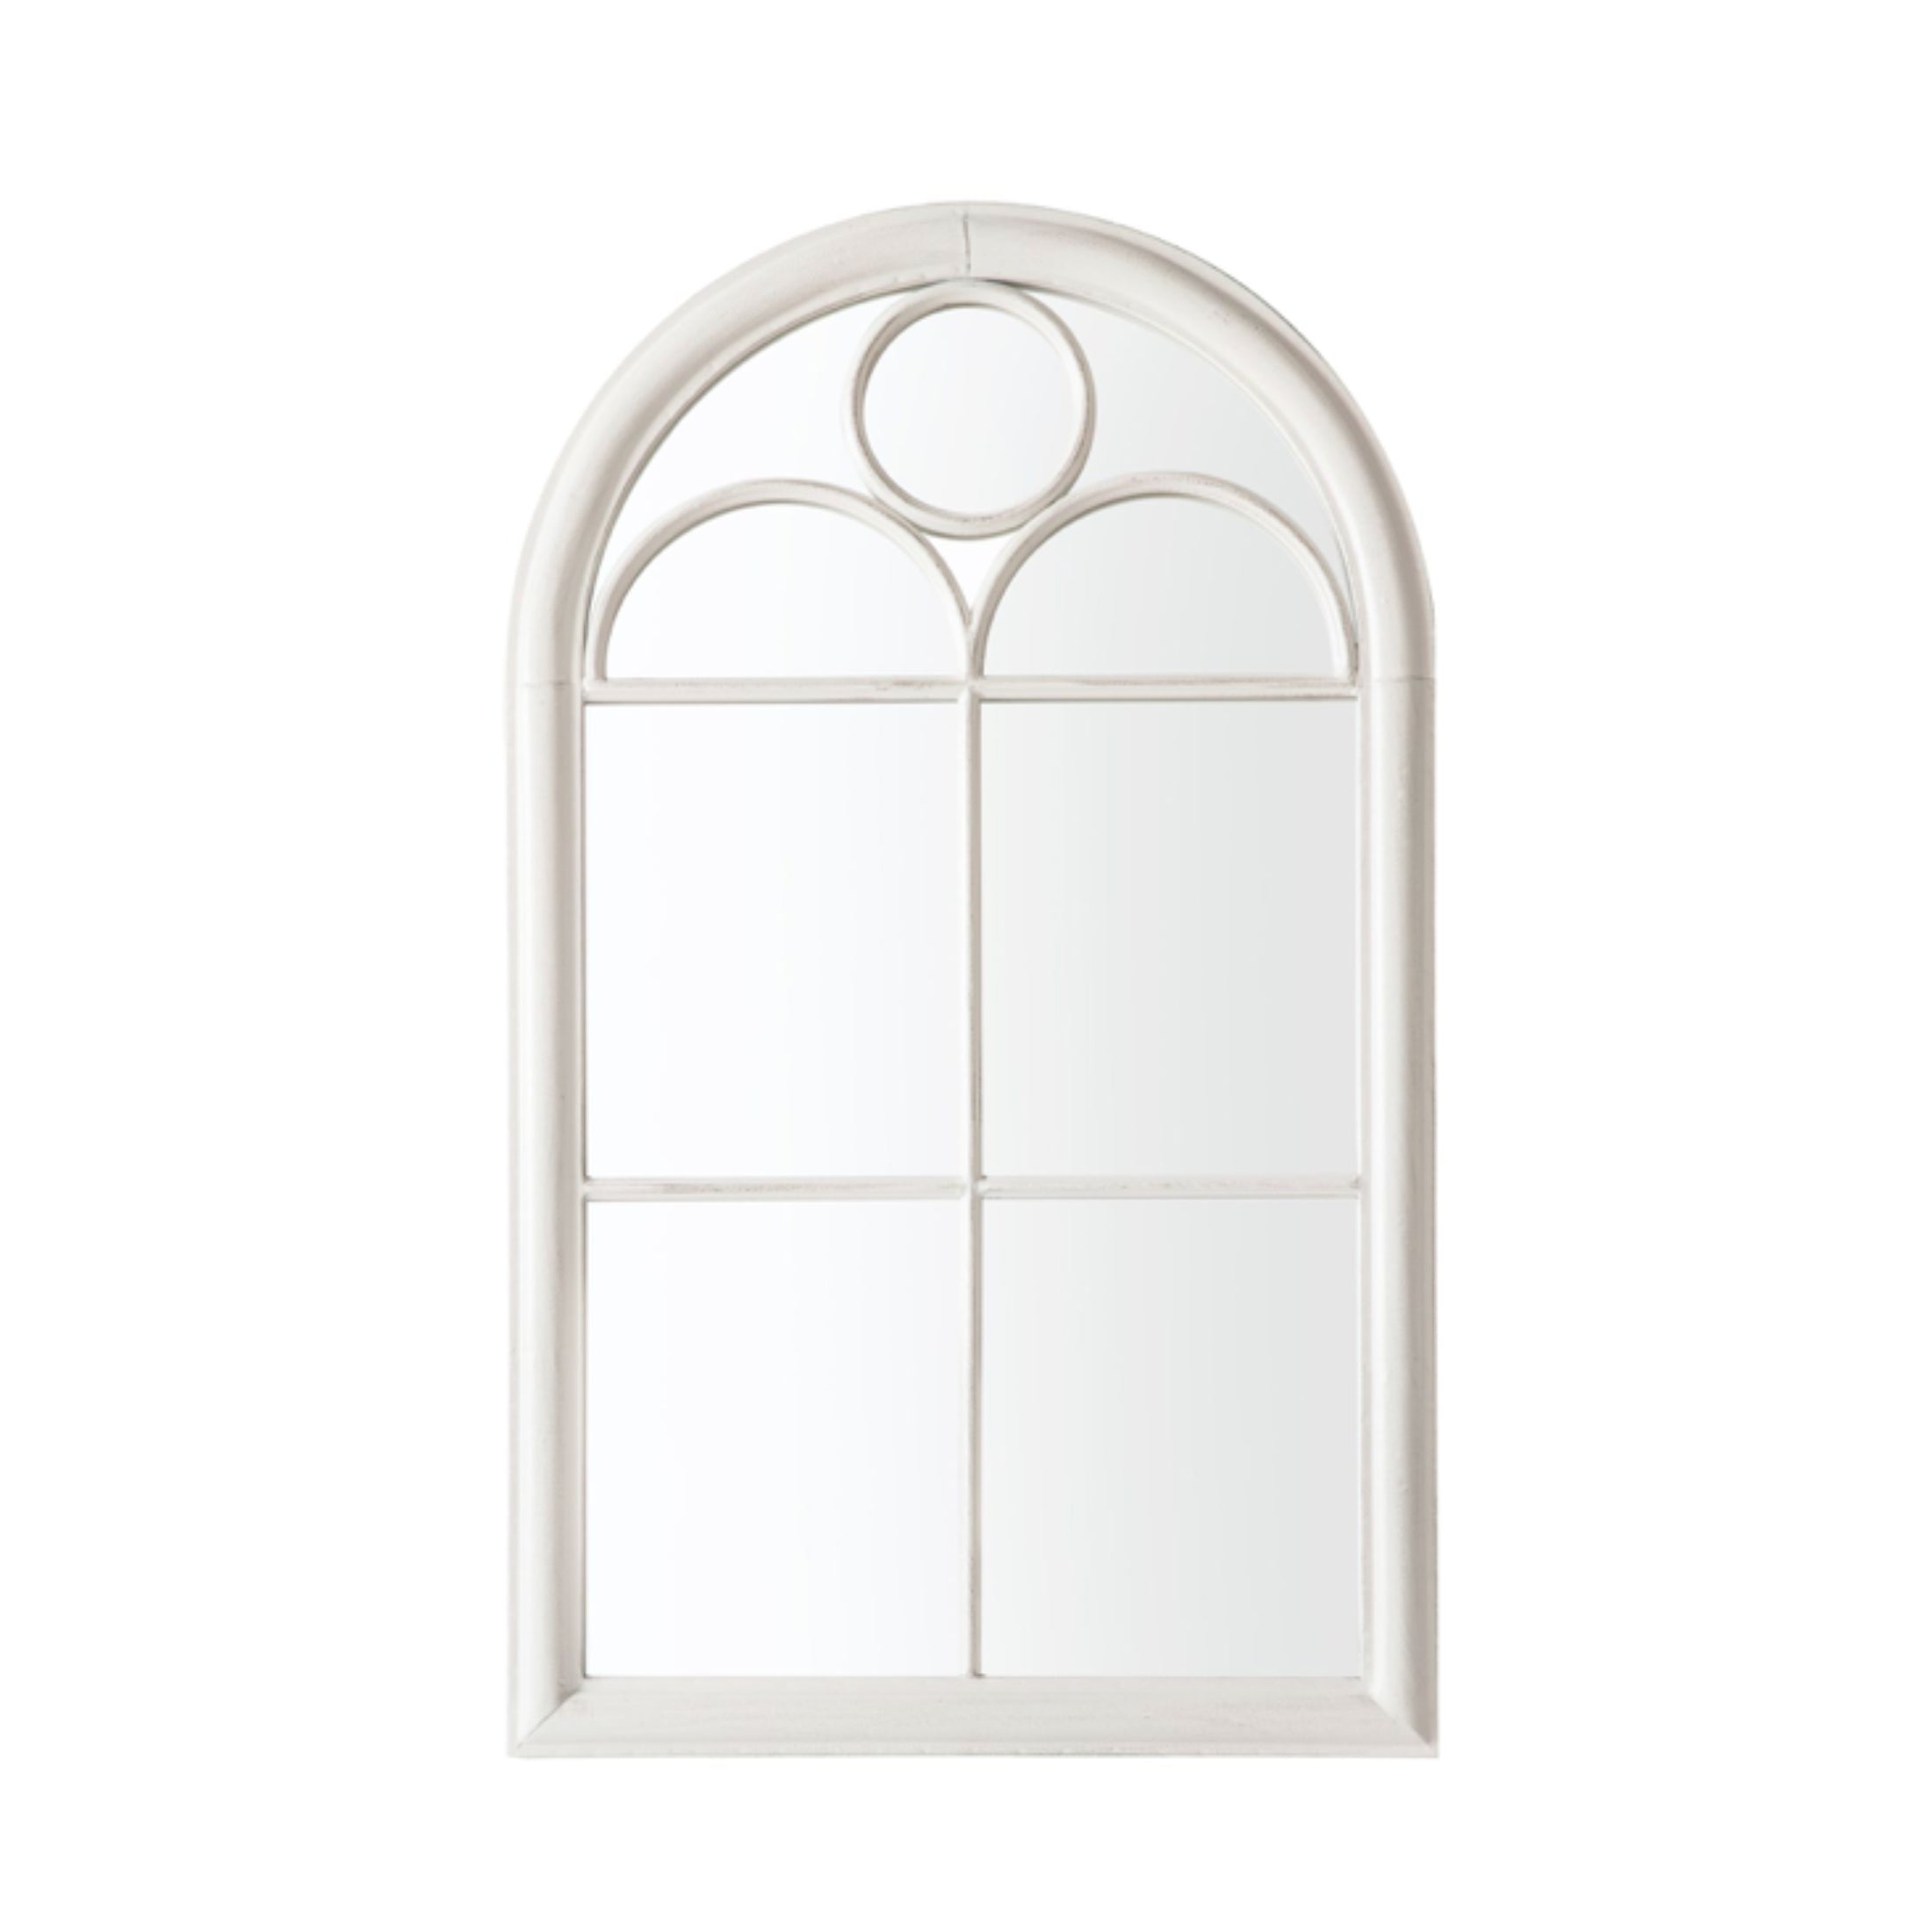 Distressed White Arched Outdoor Garden Wall Mirror 3